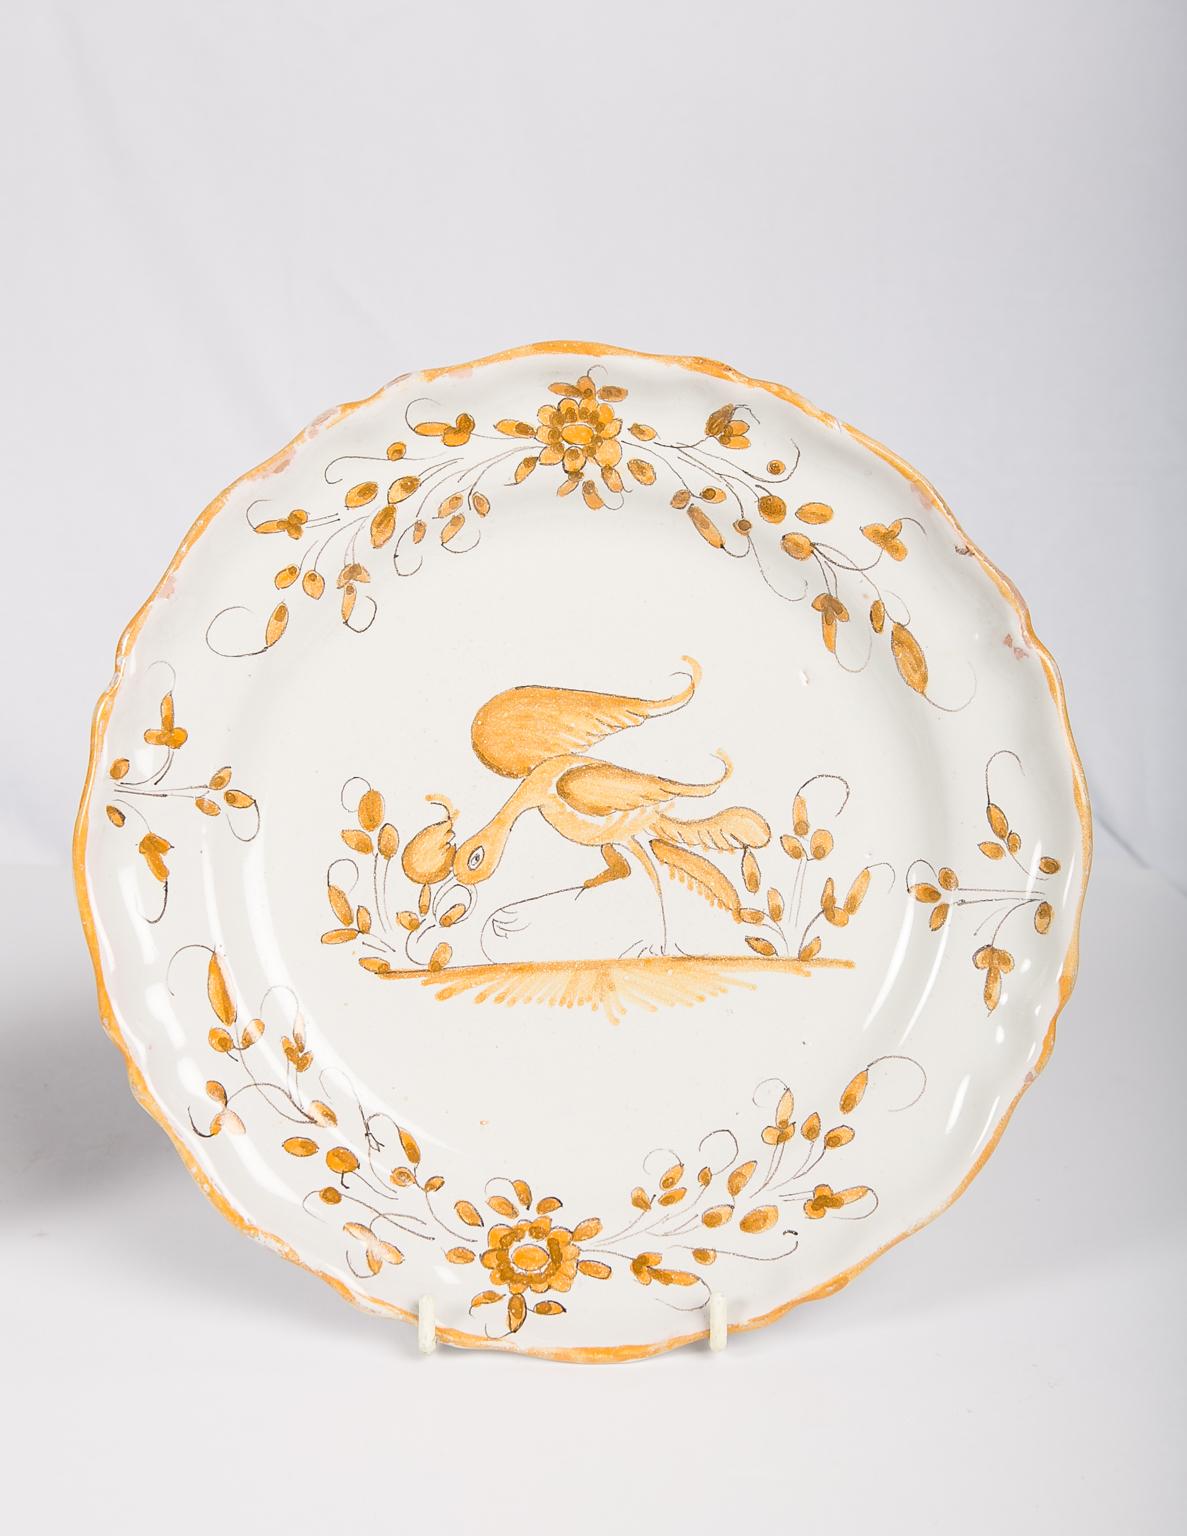 We are pleased to offer these two 18th century French faience dishes painted with figures. The first plate, mustard yellow on a white ground, features an amusing stylized bird. The second plate light green on a white ground shows the 